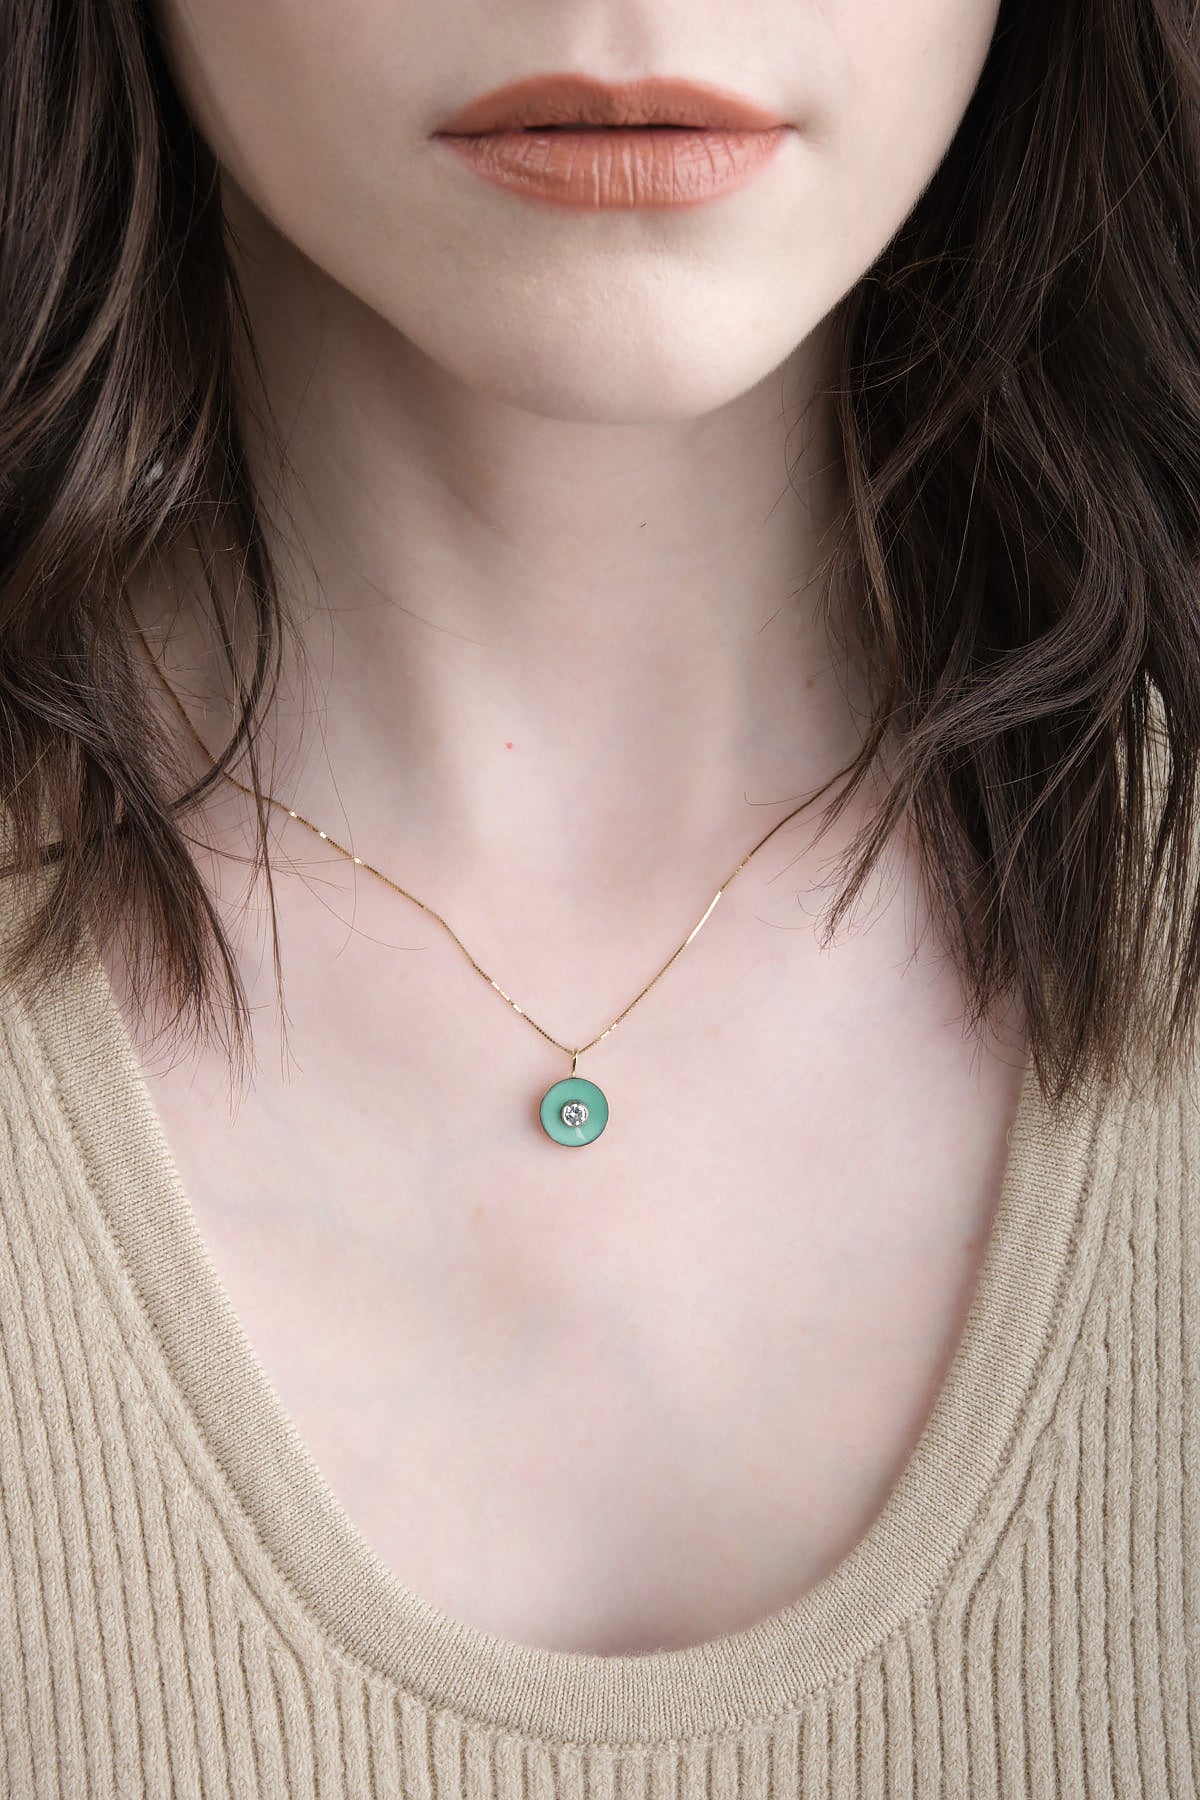 Young in the Mountains Cerclen Necklace in Lucin Variscite